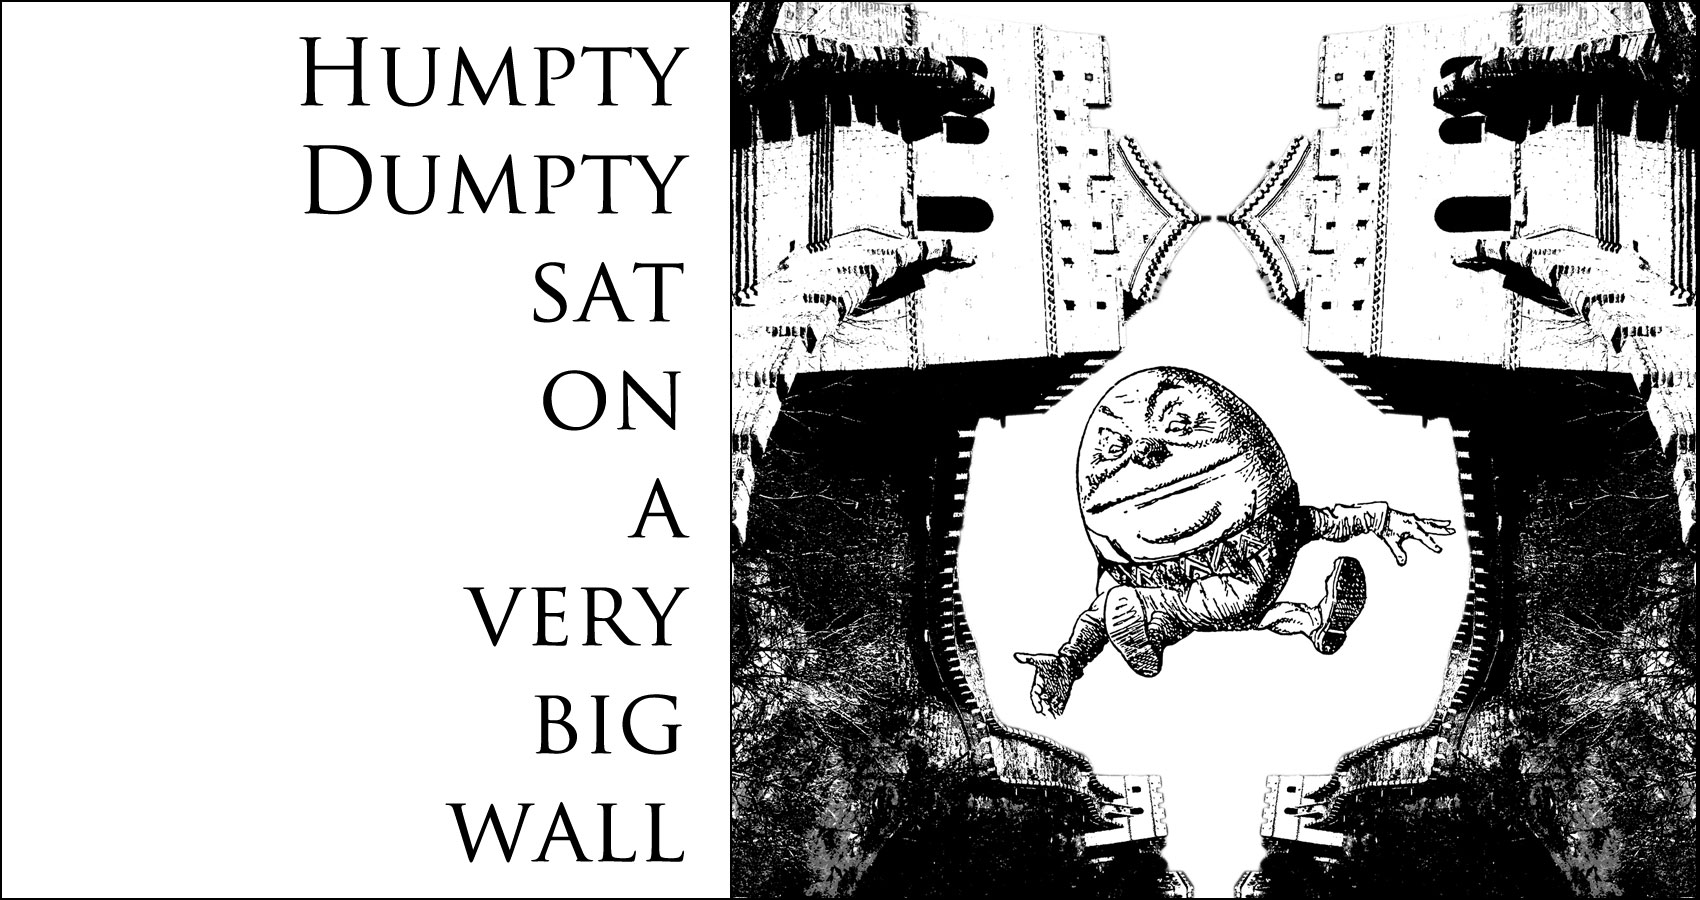 Humpty Dumpty Sat on a Very Big Wall by MR. QUIPTY at Spillwords.com